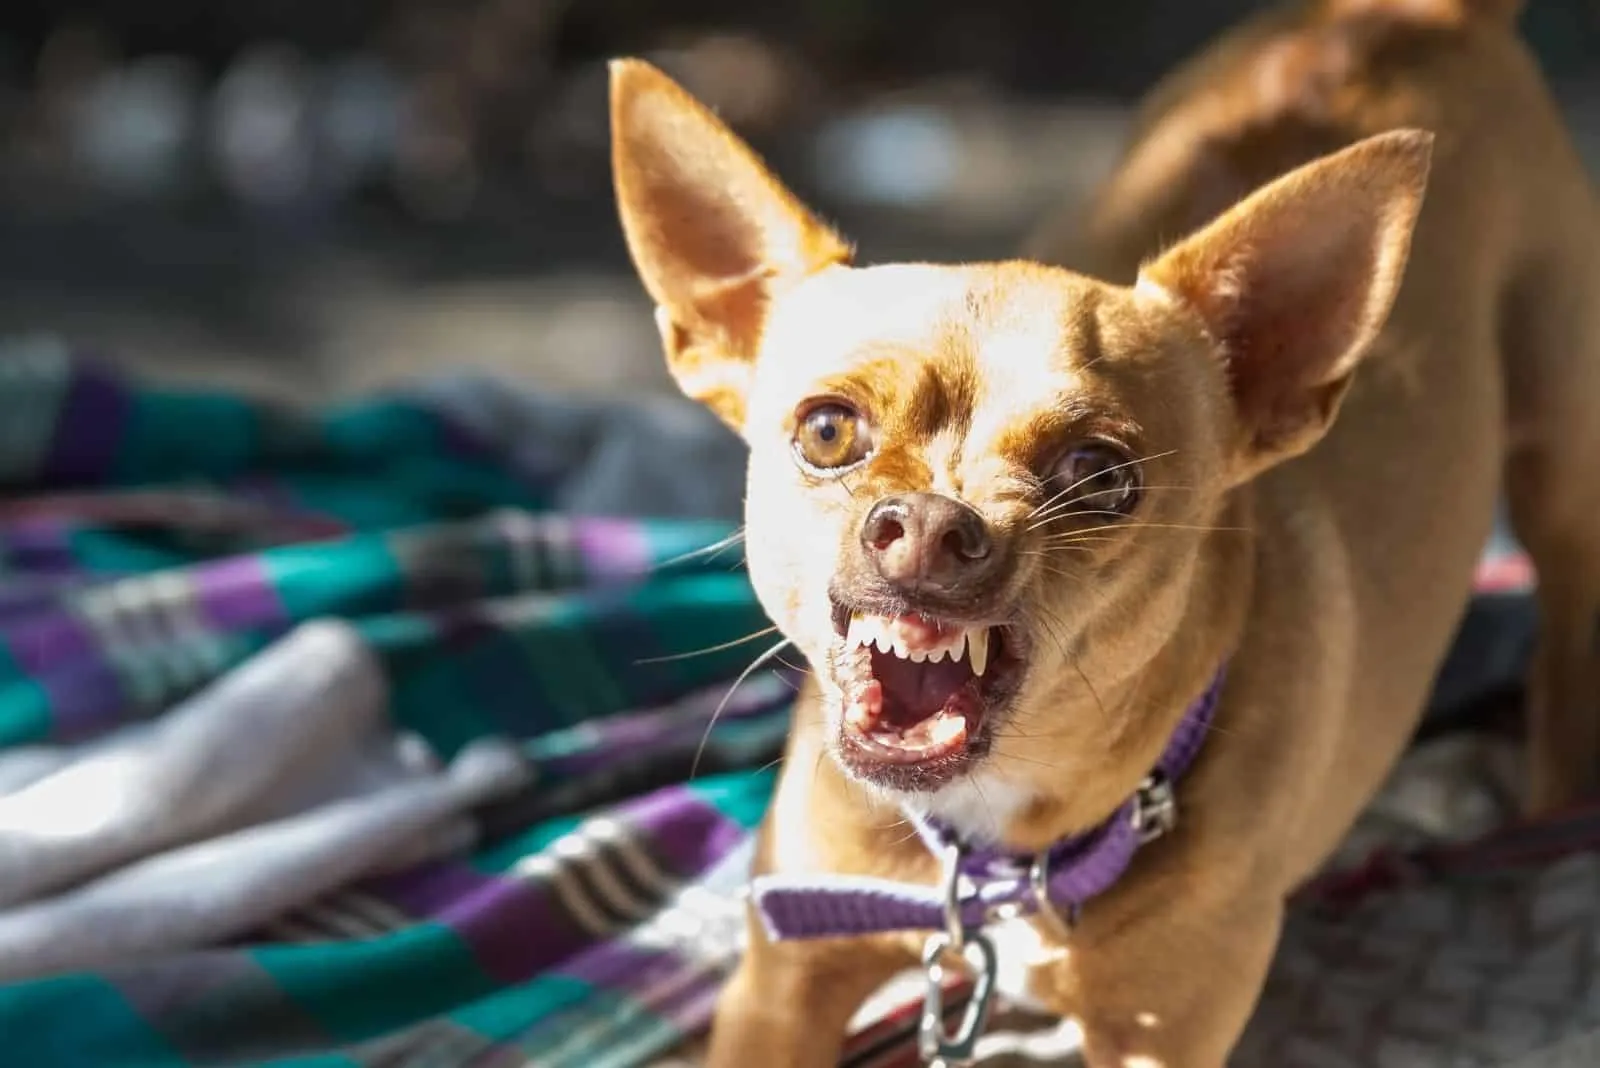 dramatic image of a chihuahua dog angry and ready to defend its territory